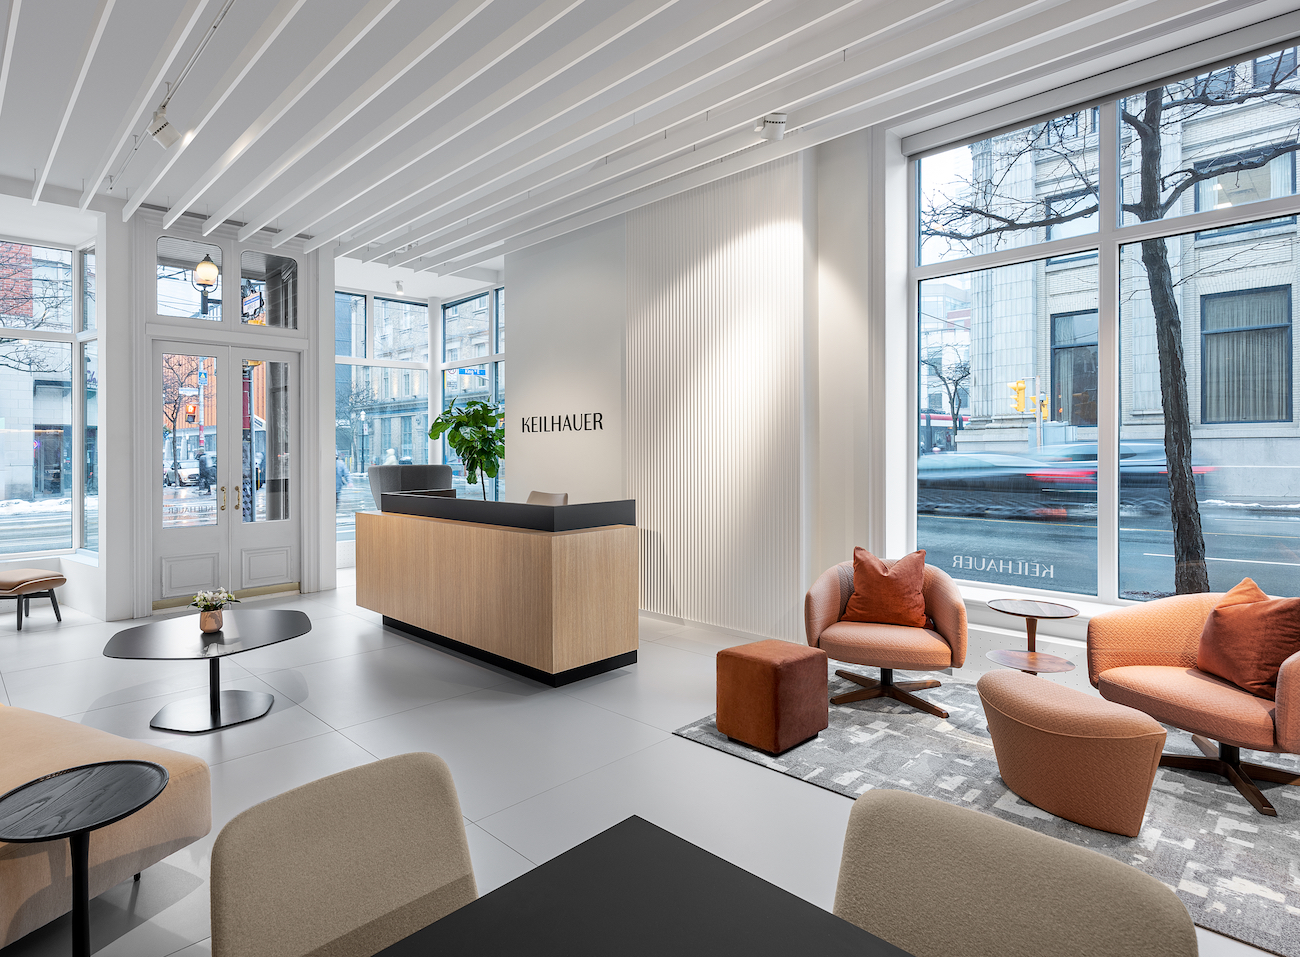 Keilhauer Furniture Showrooms in Toronto